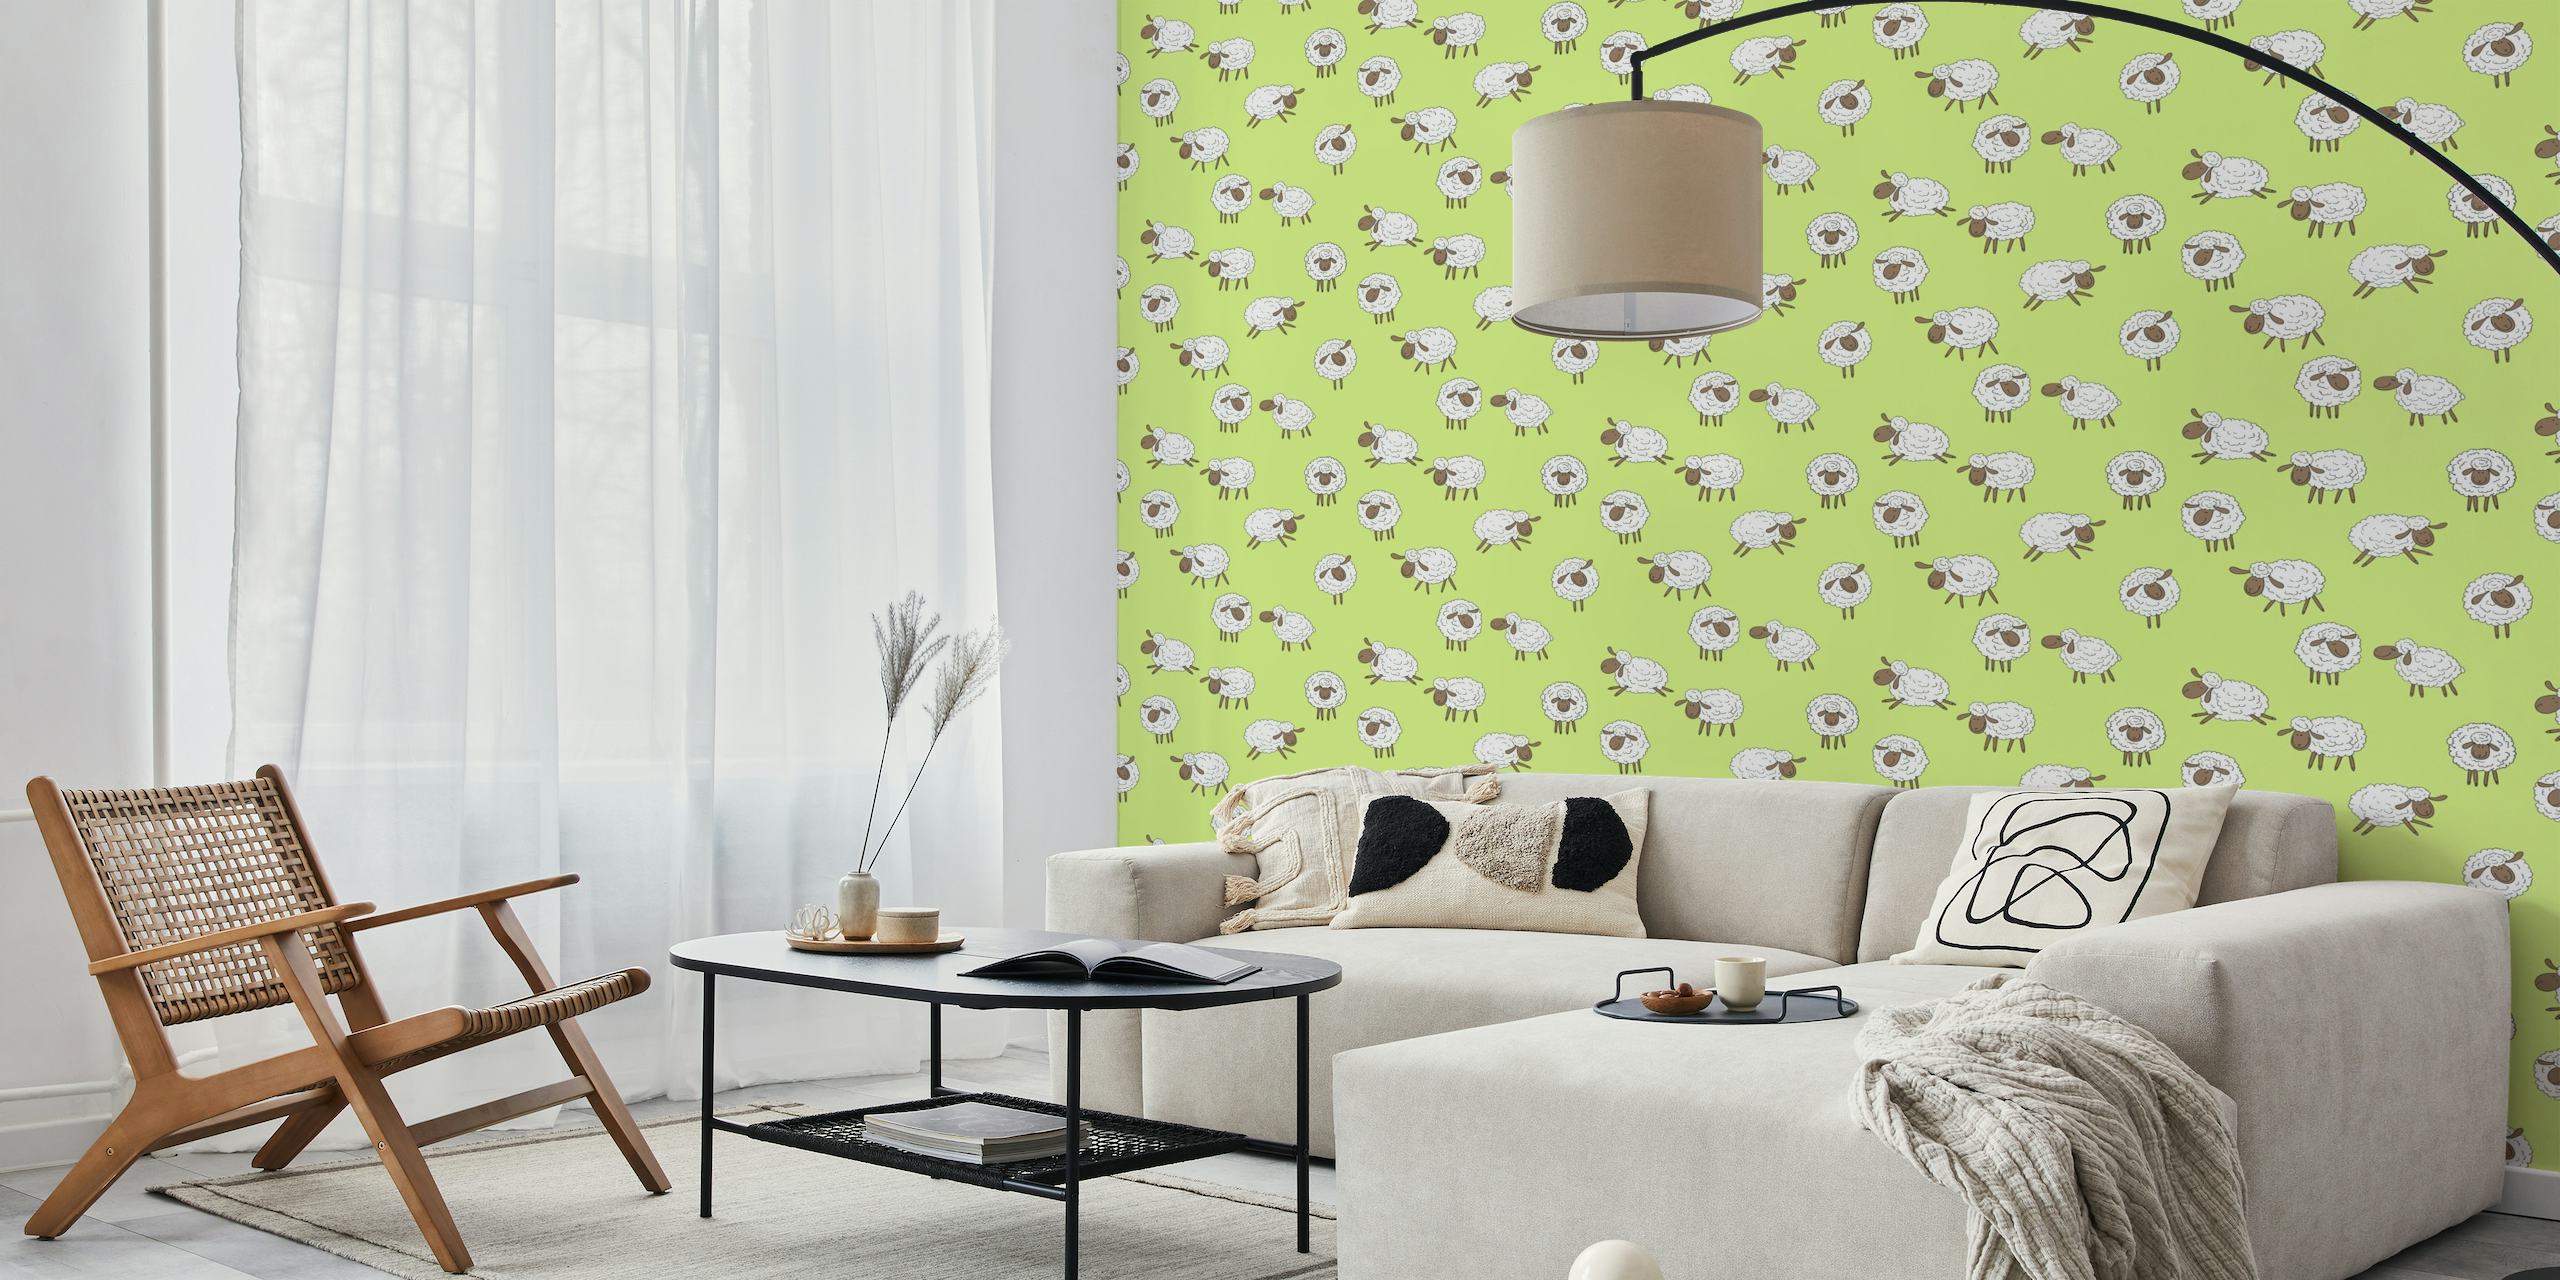 Counting sheep on honney dew green wallpaper